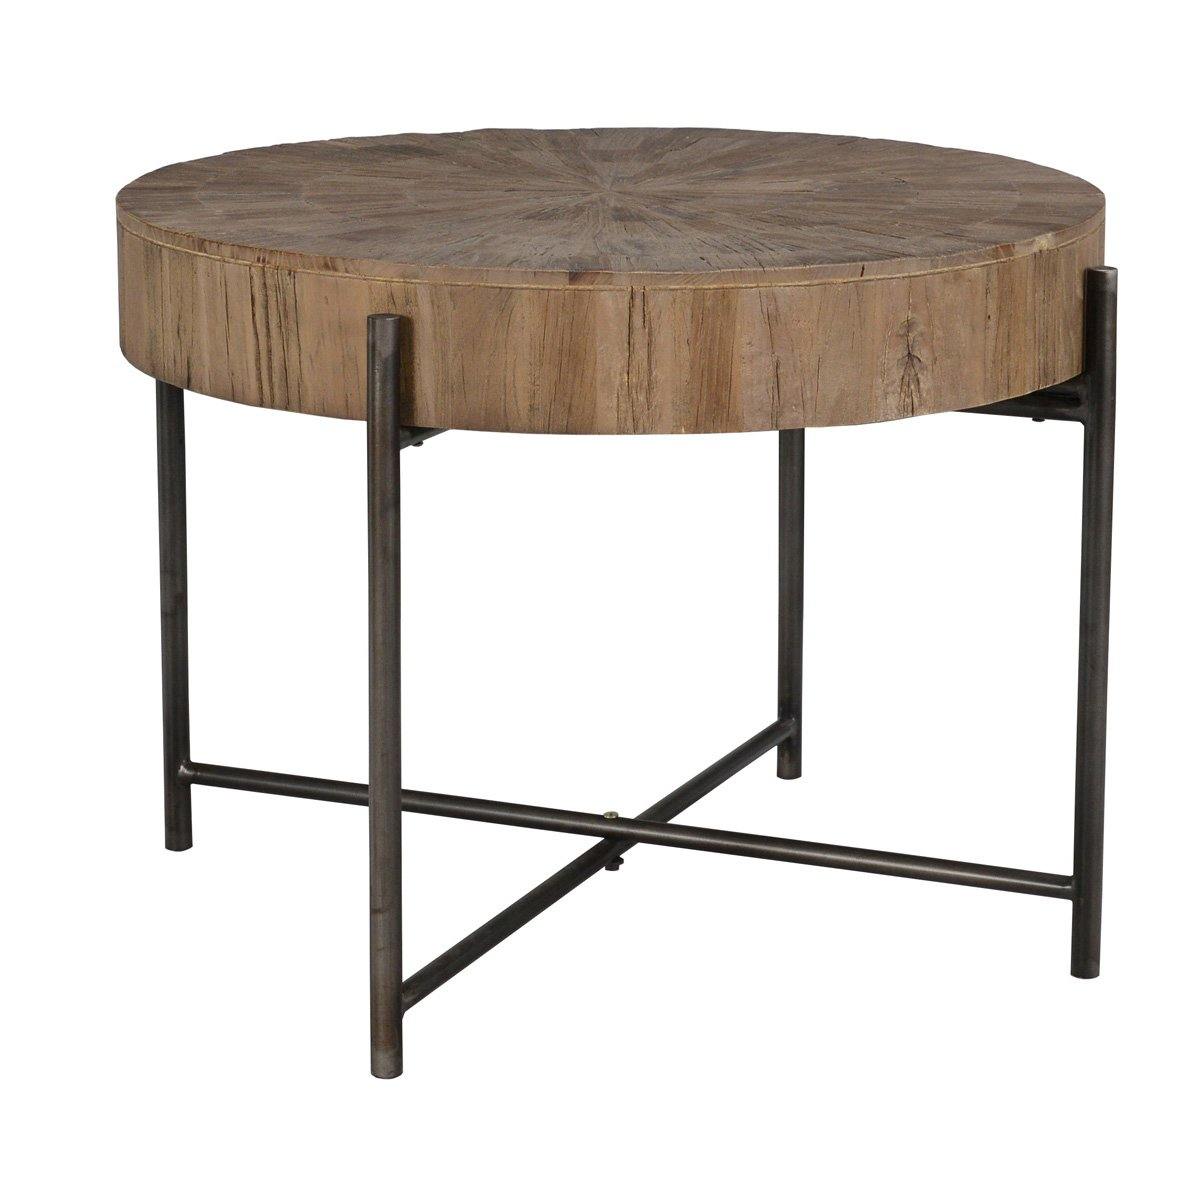 Molly 28" Coffee Table - The Tin Roof Furniture